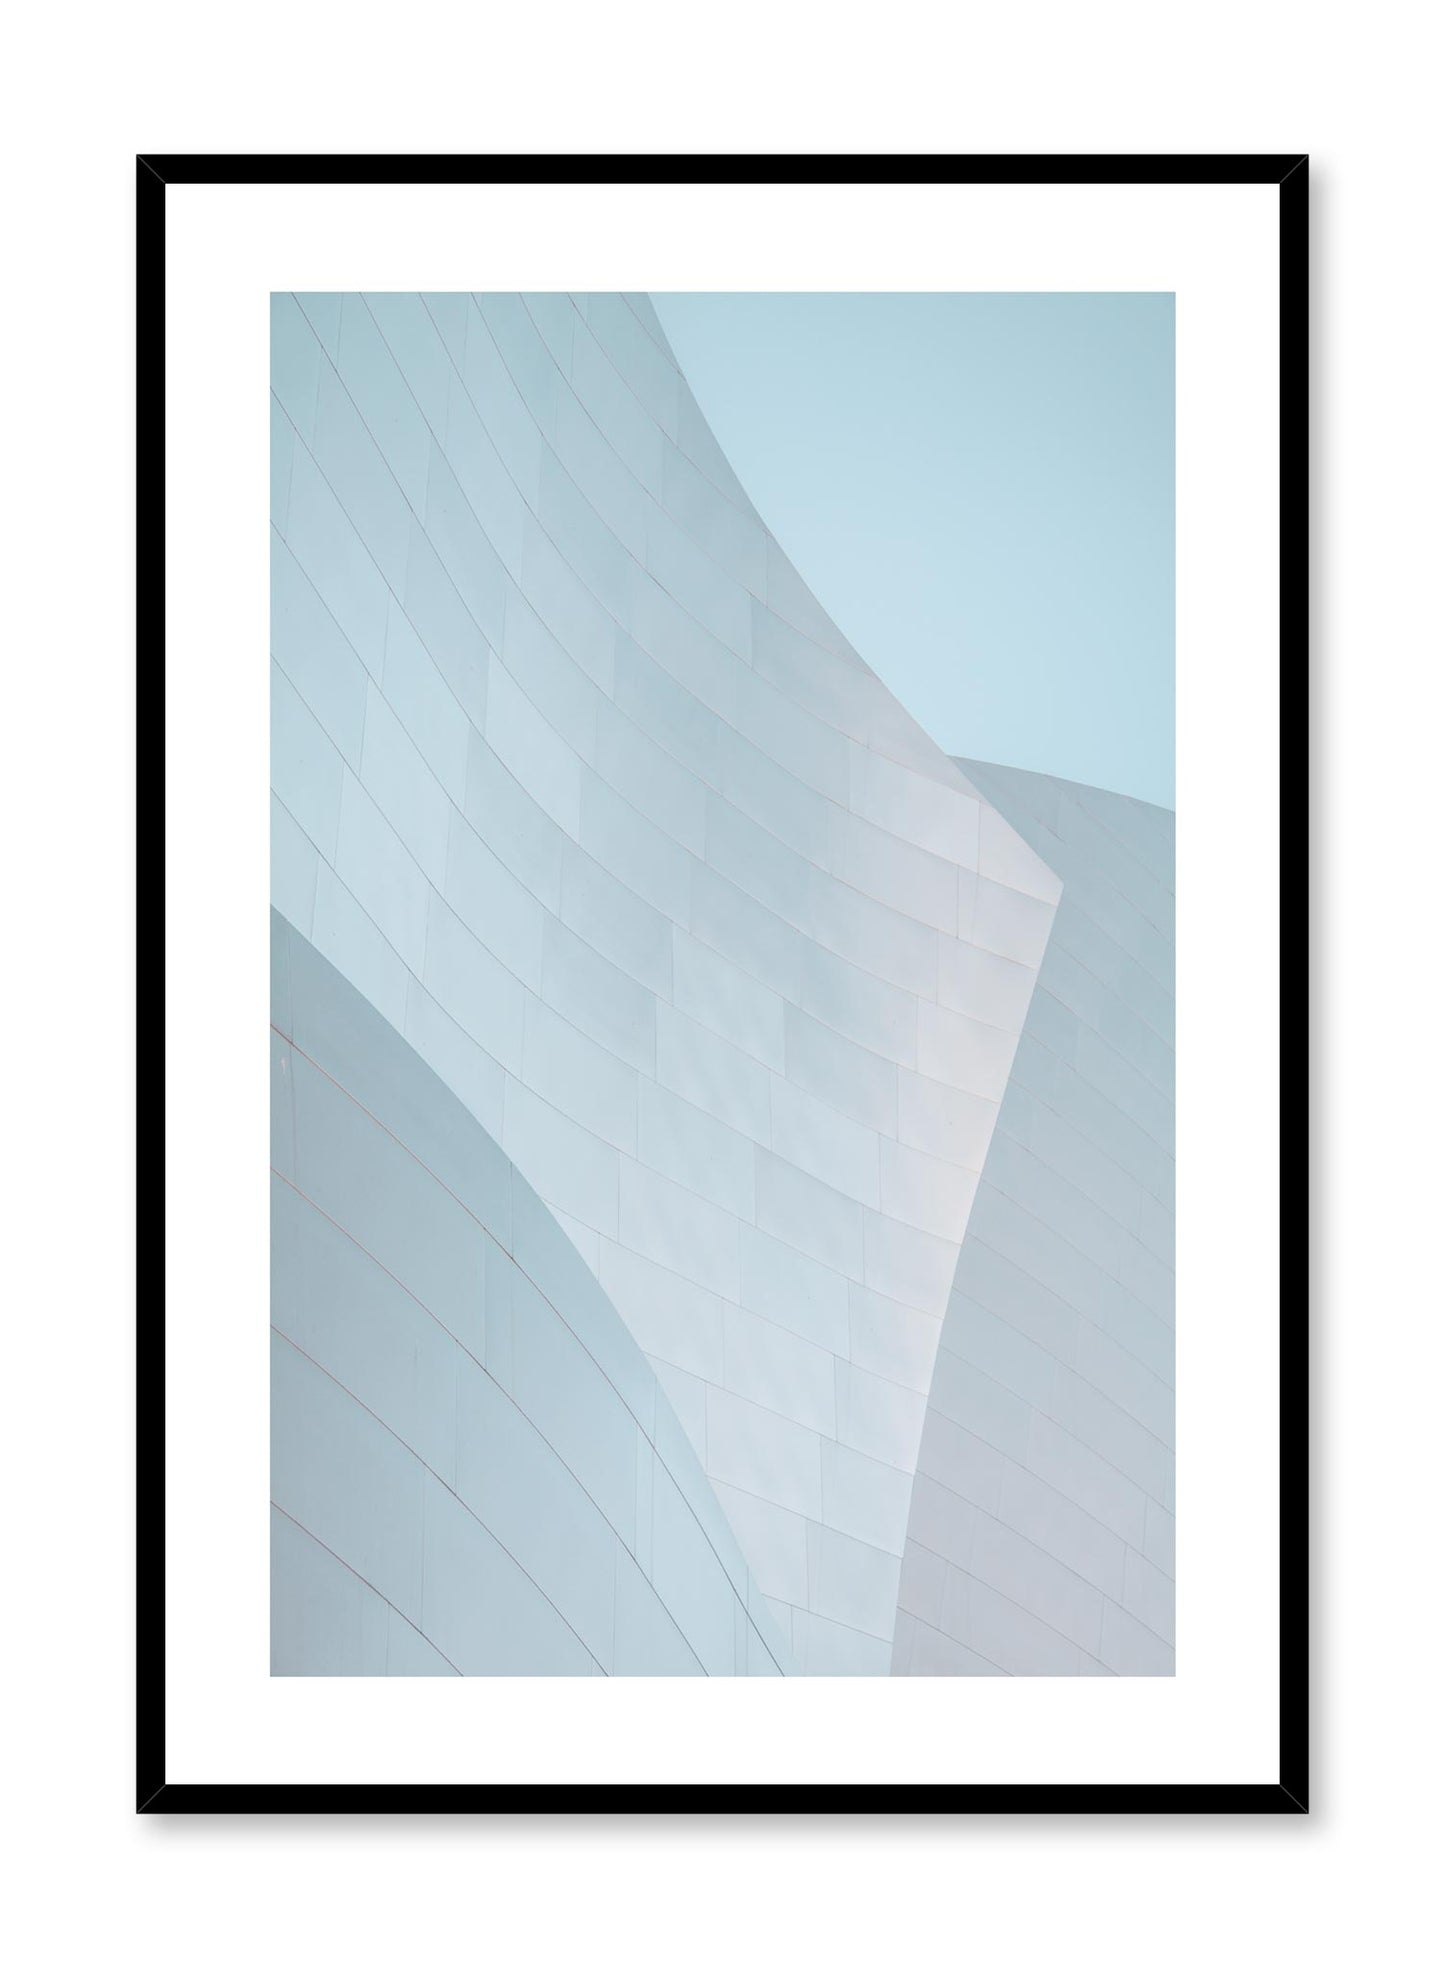 Minimalist design poster by Opposite Wall with urban photography of grey building architecture waves